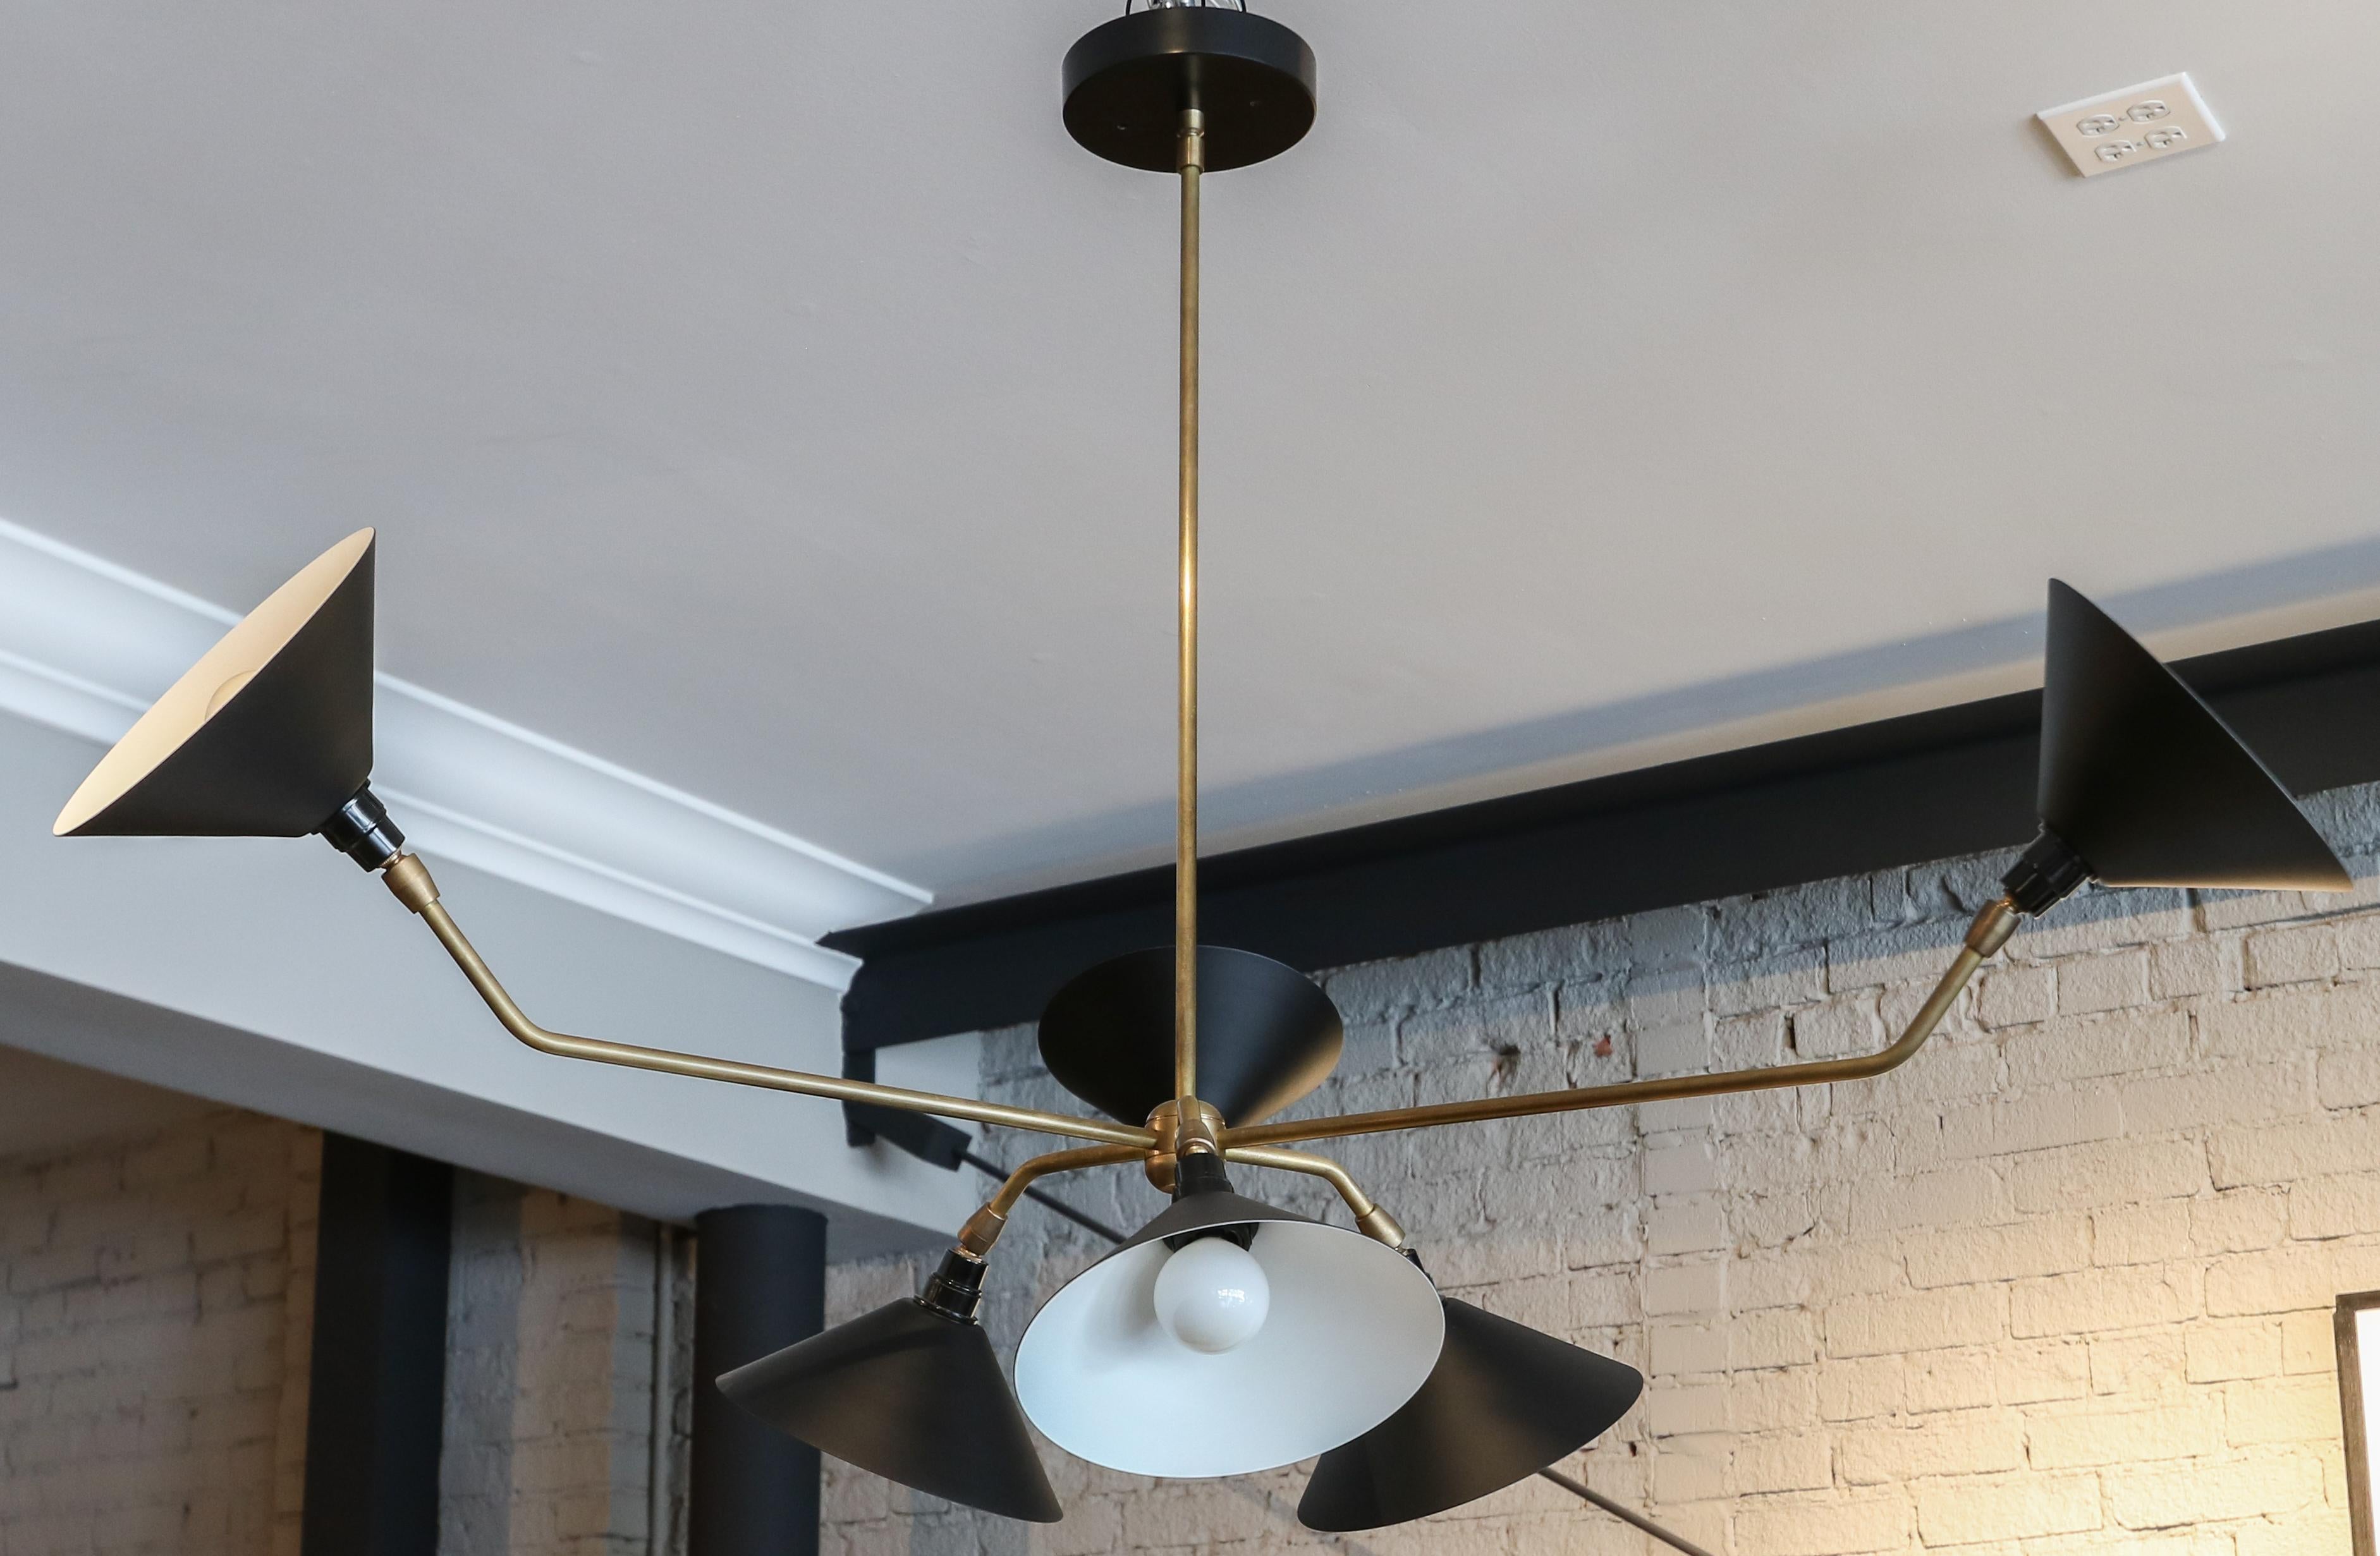 Custom midcentury style chandelier with brass frame and six arms with black metal shades by Adesso Imports. Can be done in different sizes, configurations and colors.